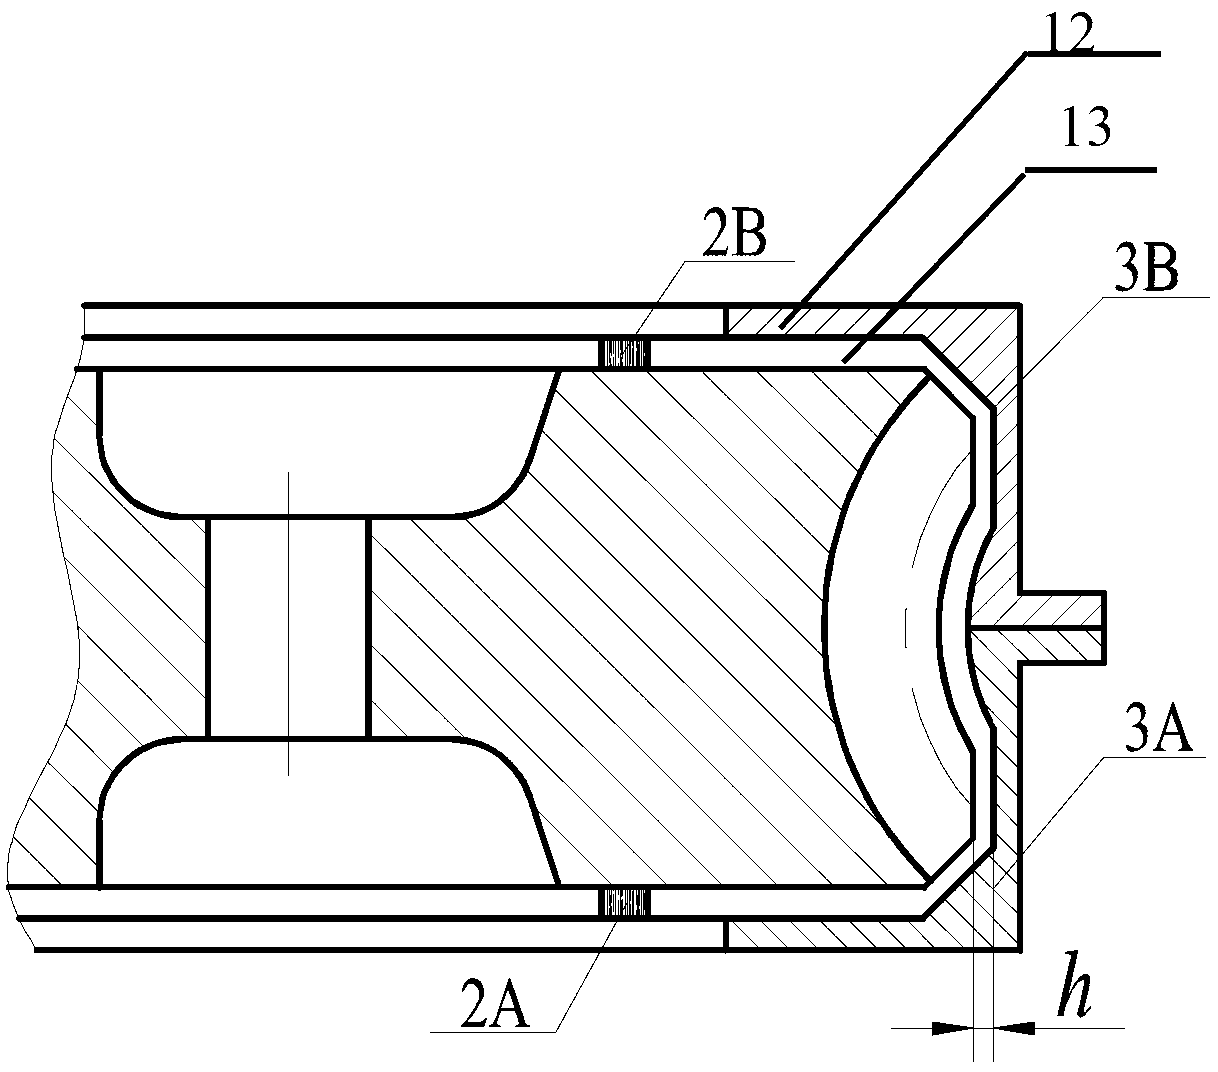 Vertical worm and worm gear mechanism with self-lubricating function